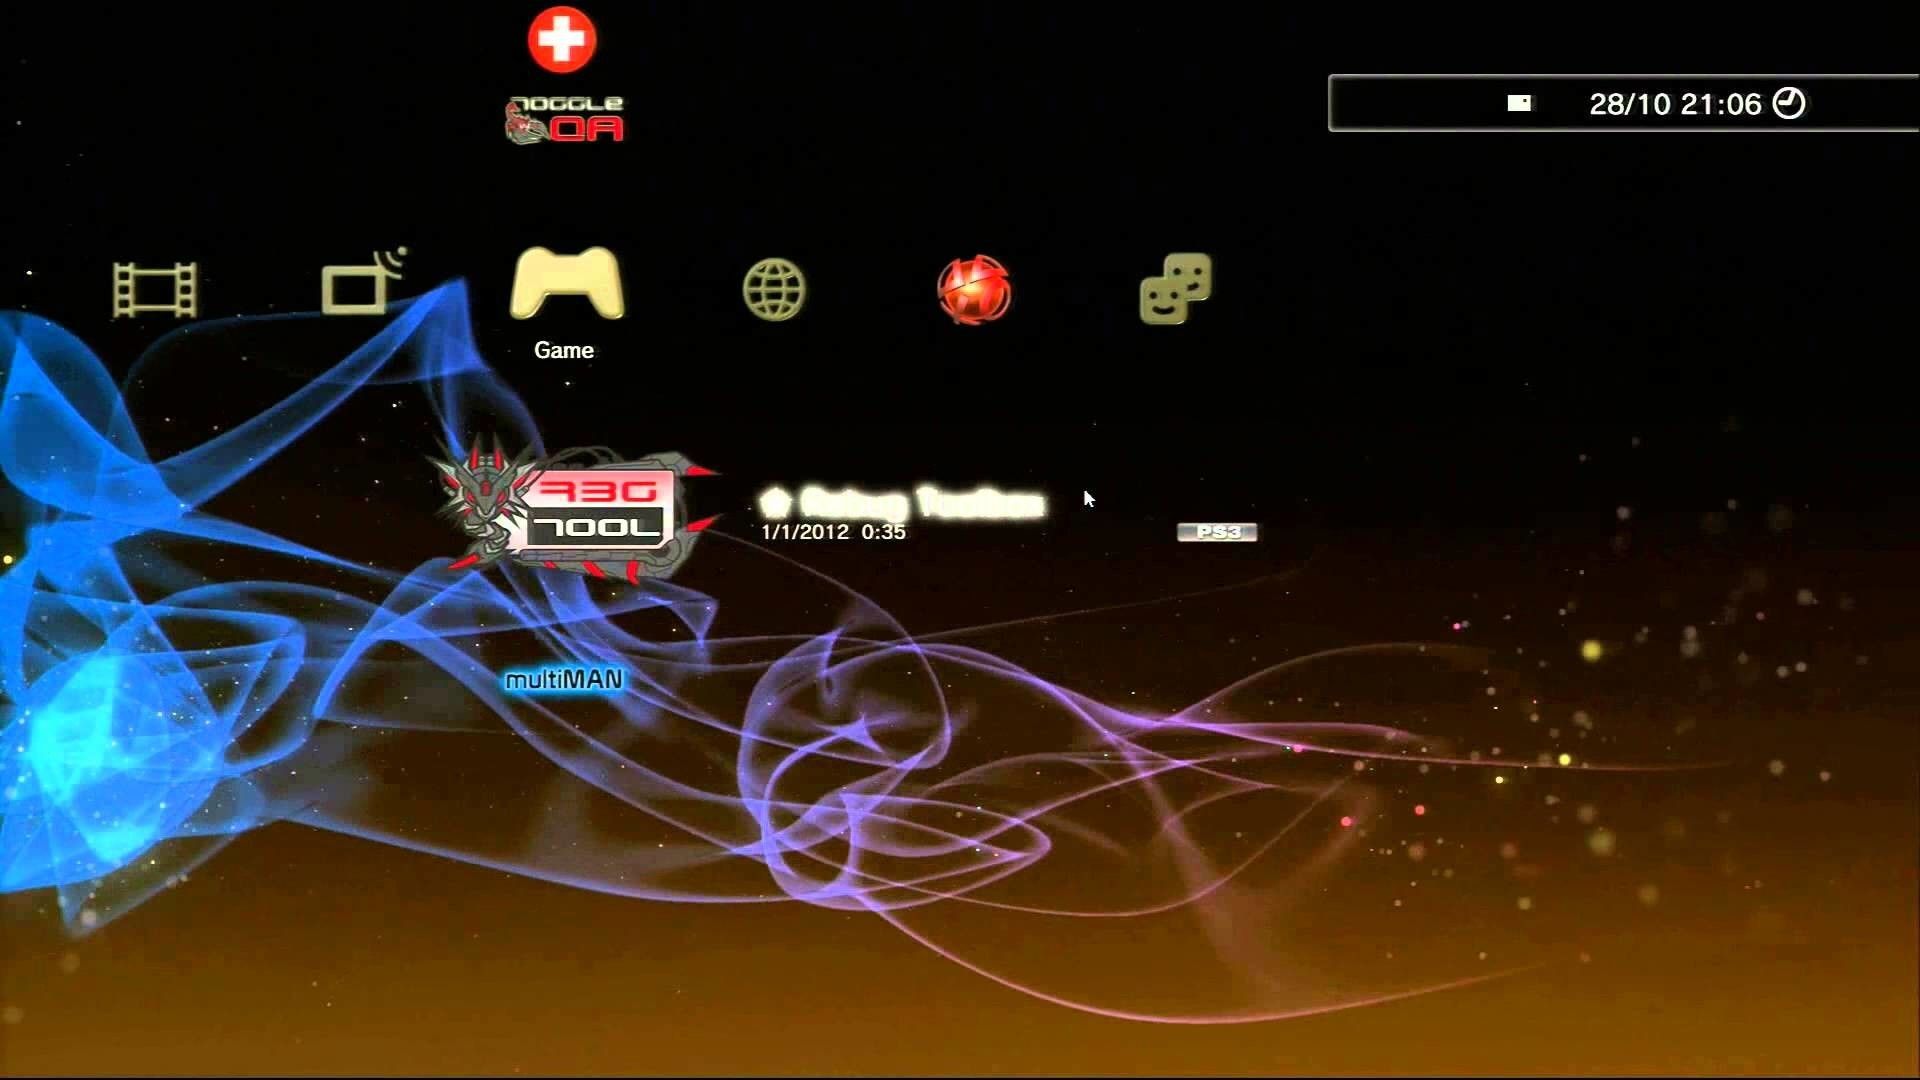 PS3 Background Themes